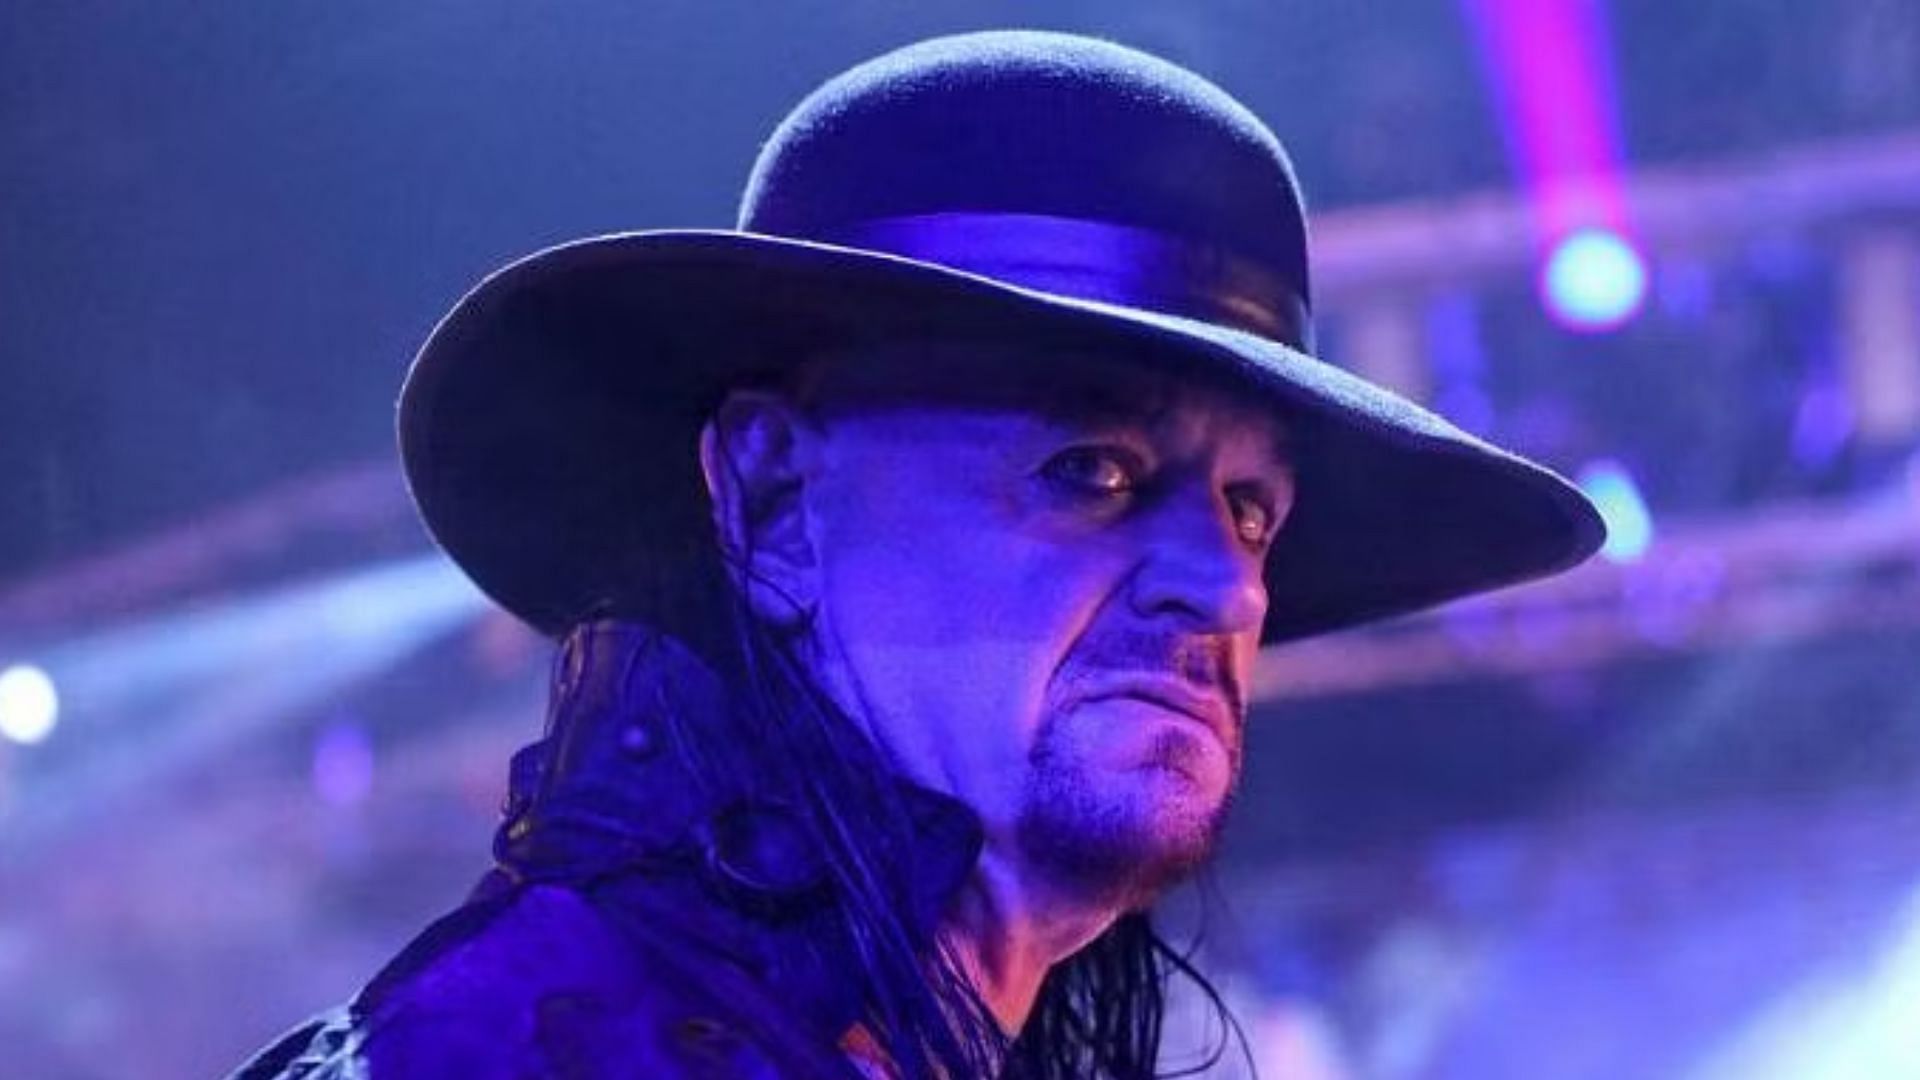 An old foe of WWE Hall of Famer The Undertaker resurfaced online!